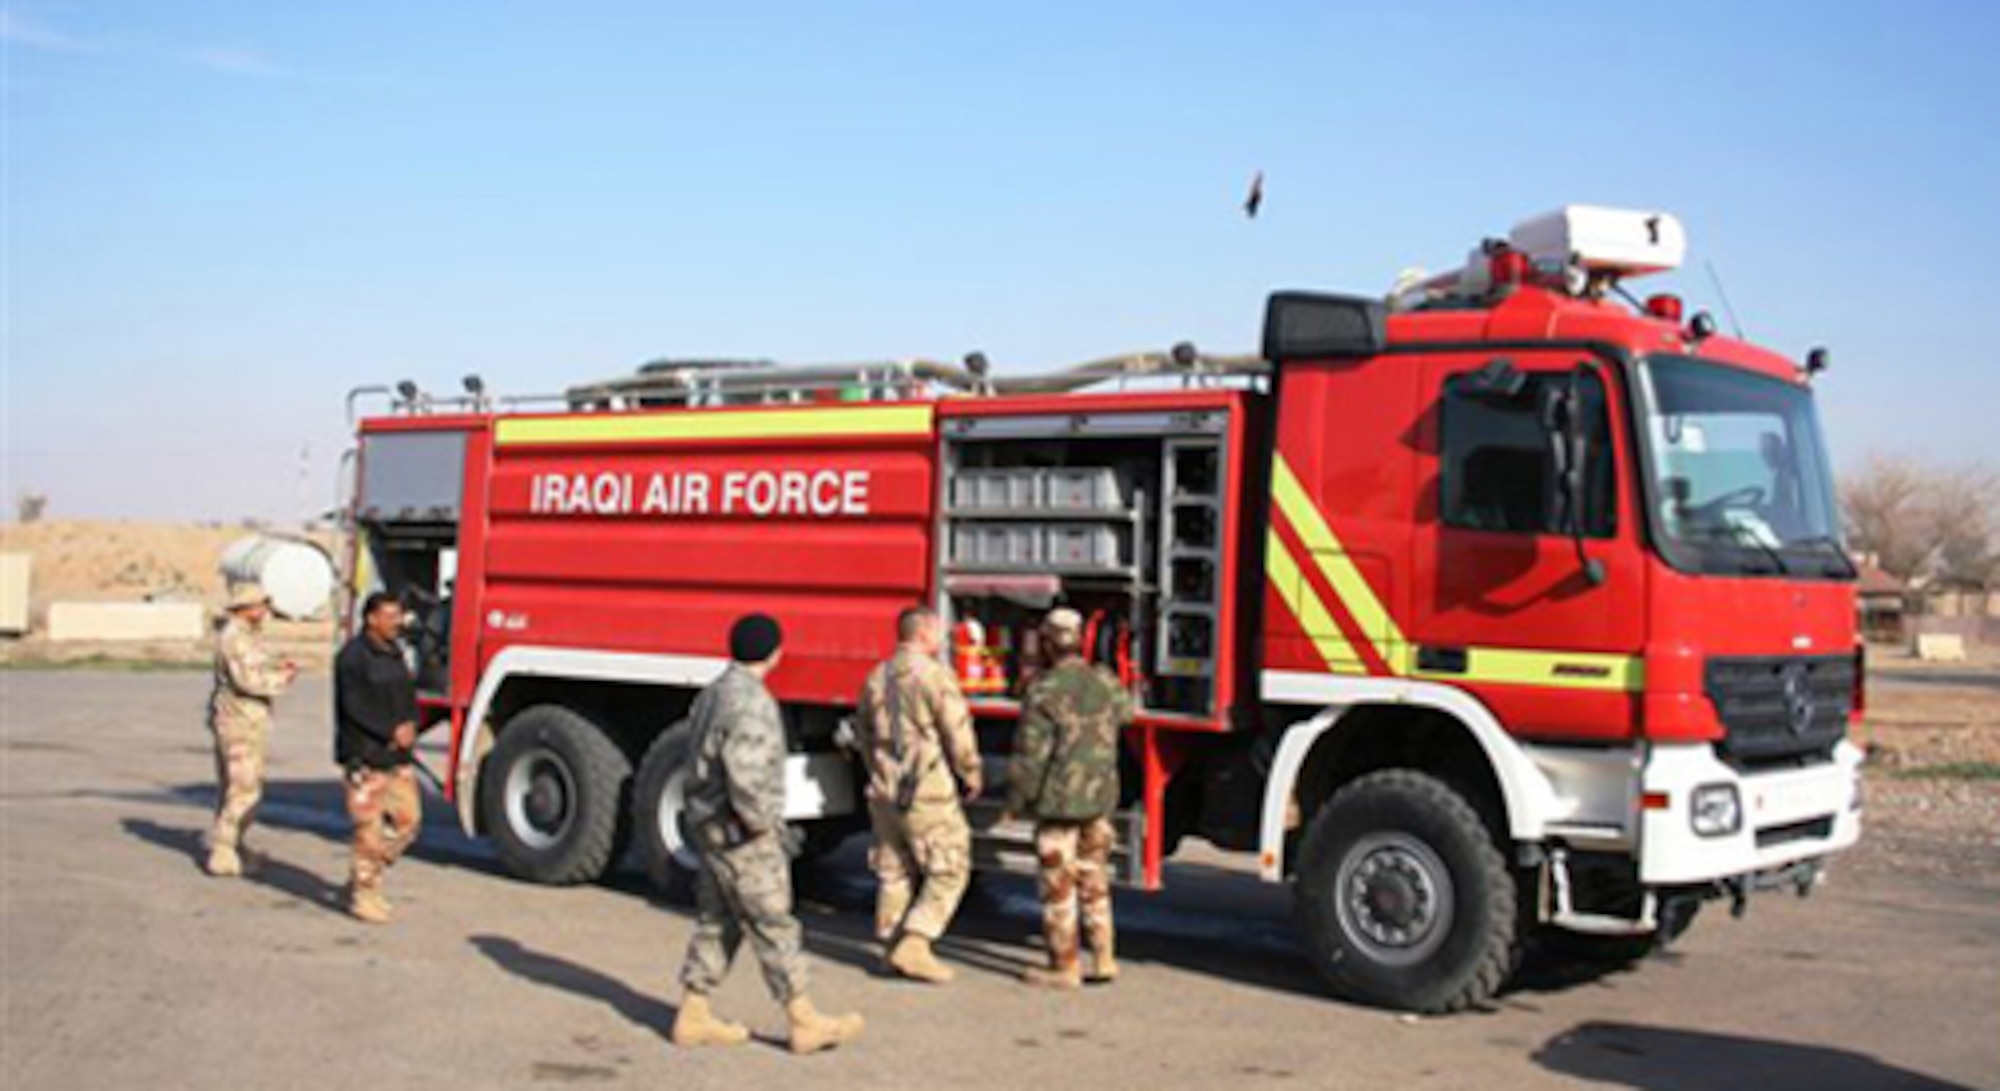 Staff Sgts. Manuel Ortez and Joseph Wysocki from the 512th Airlift Wing, Dover Air Force Base, Del., oversee the placement of equipment on an Iraqi air force fire truck with their Iraqi counterparts. Eight firefighters from the Air Force Reserve Command wing deployed to Kirkuk Regional Air Base, Iraq, Jan. 3, 2009. (U.S. Air Force photo)

